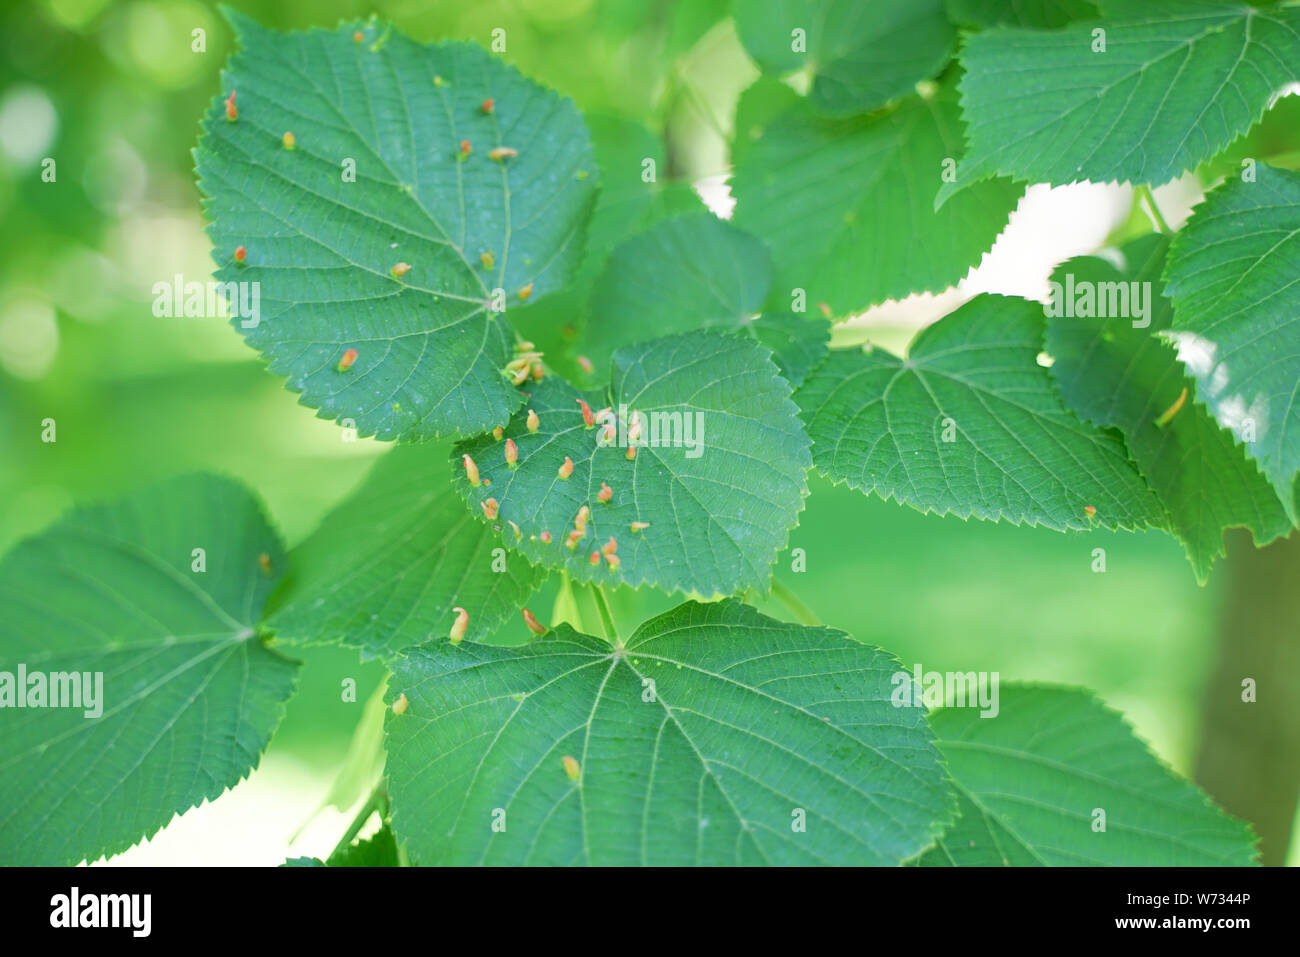 tree leaves affected by aphids. Insect pests and tree deseases. Organic food and agriculture. Stock Photo